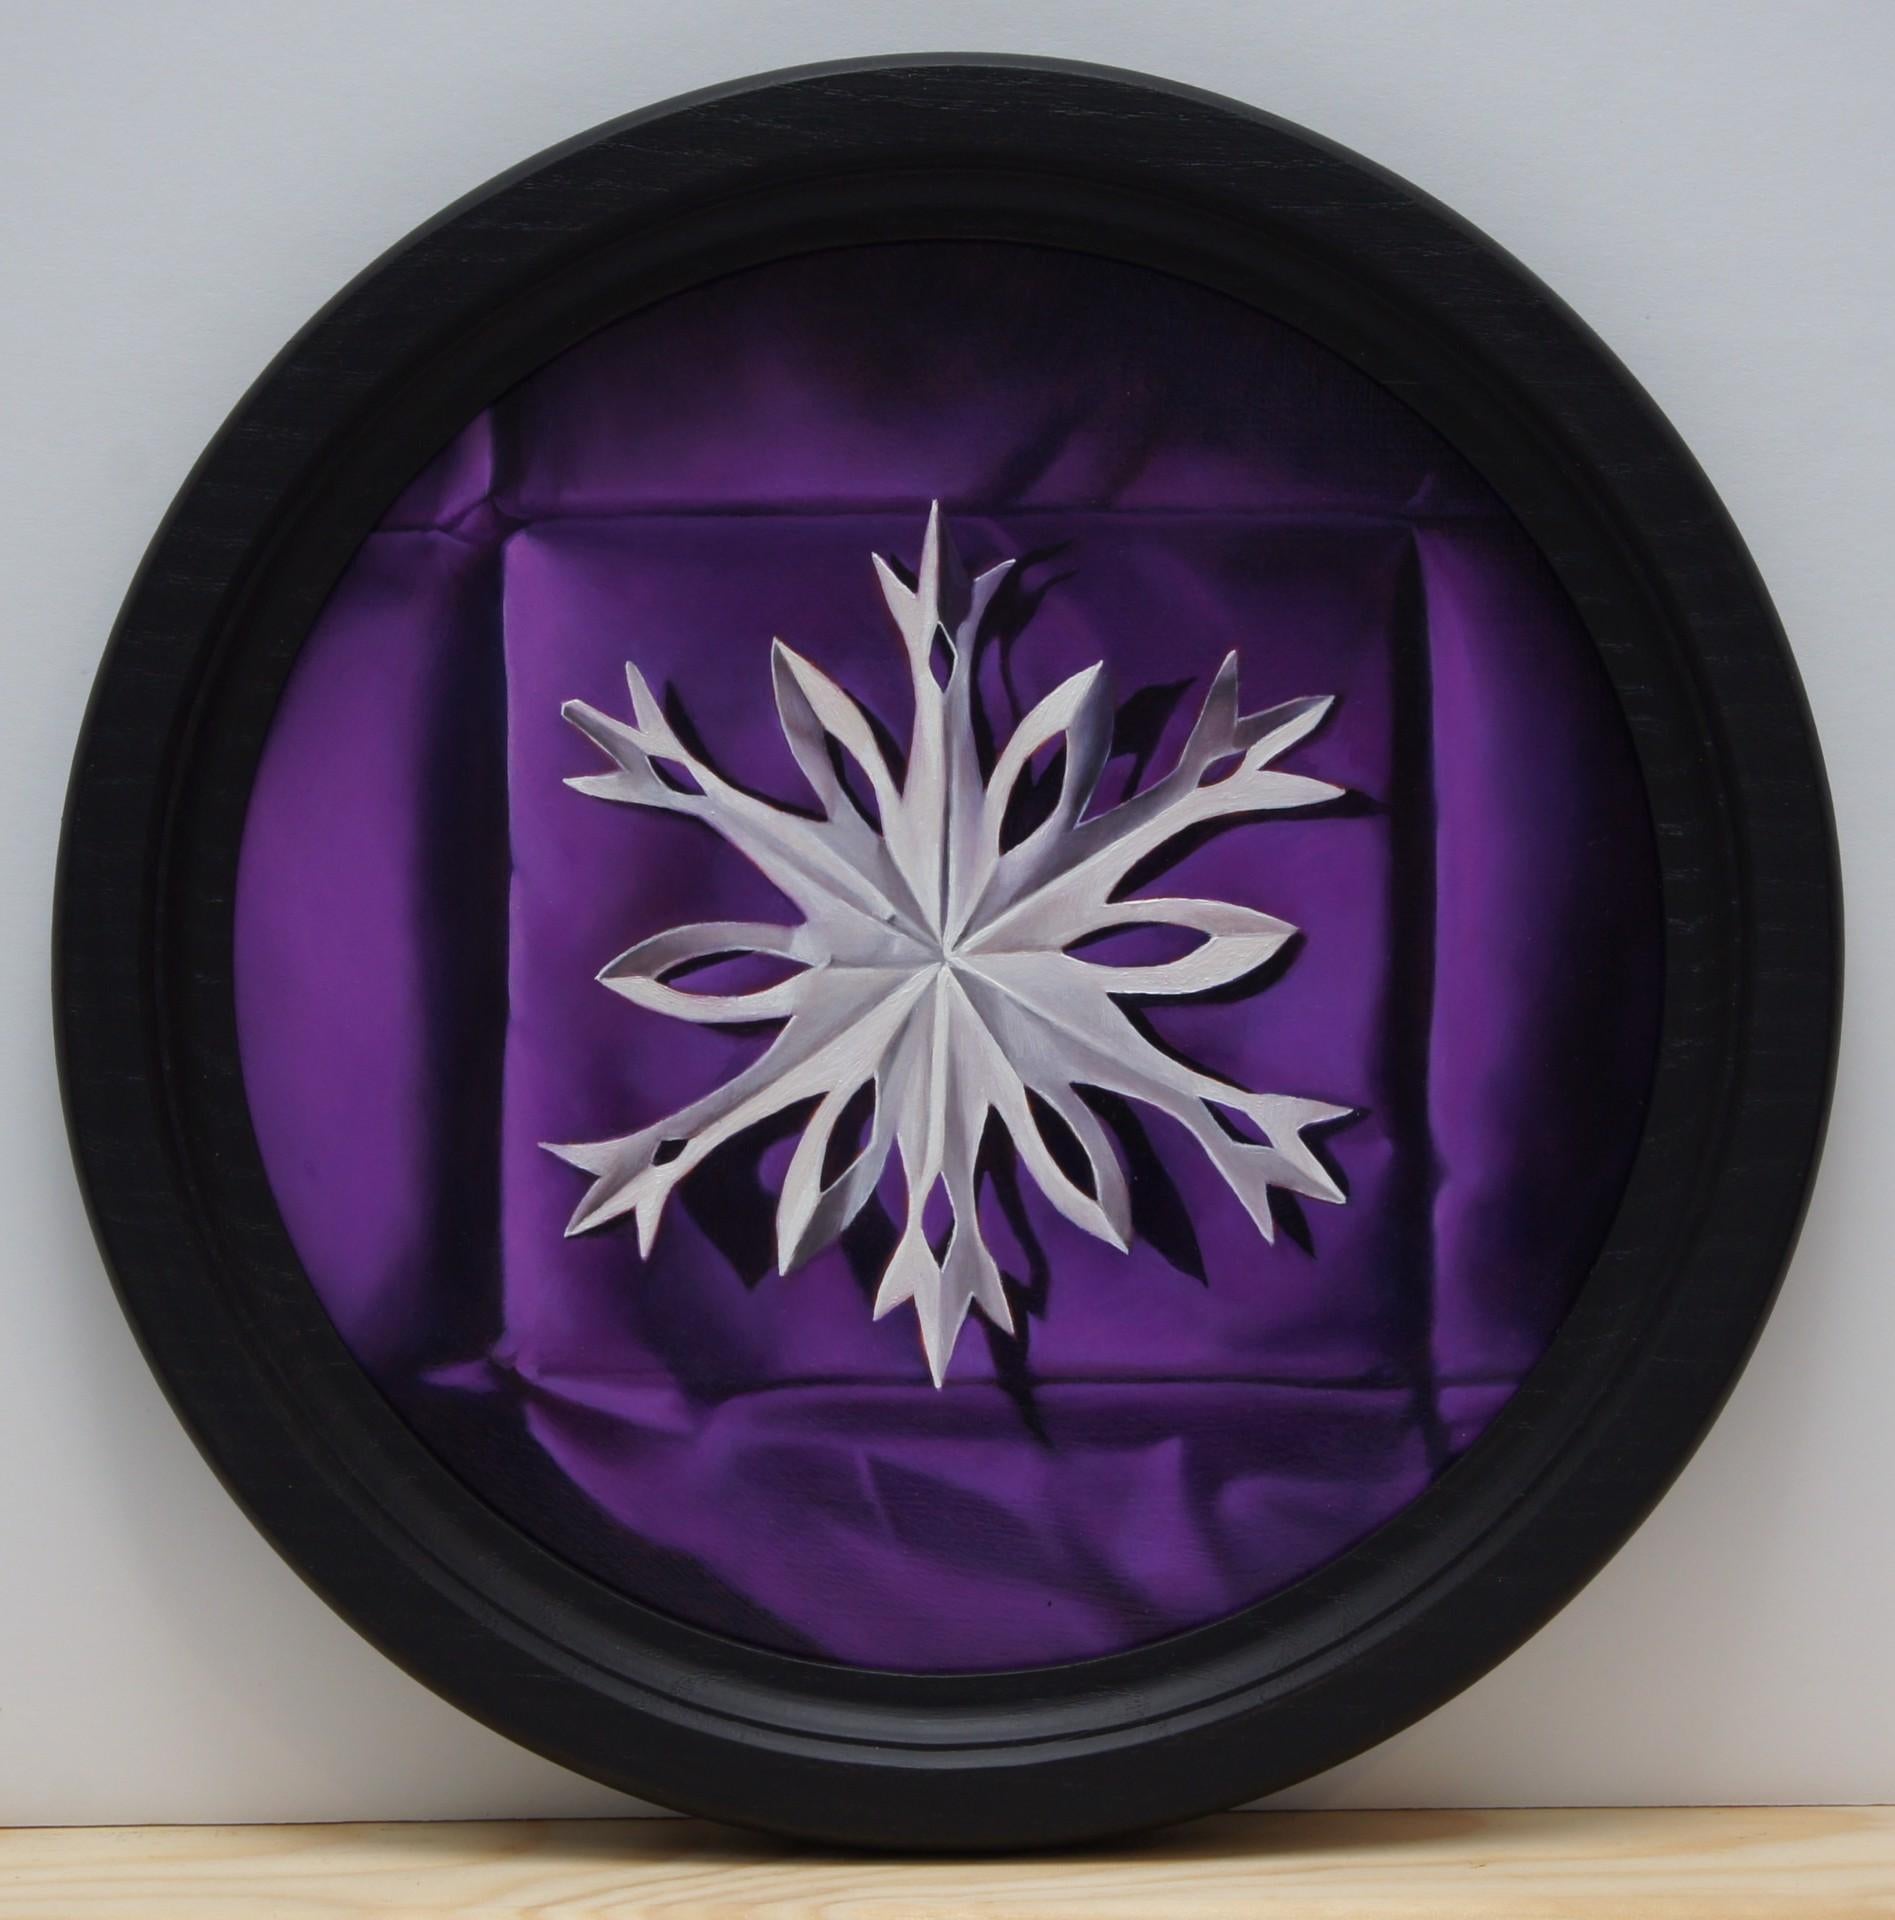 Paper Snowflake 2 - Painting by Amy Ordoveza